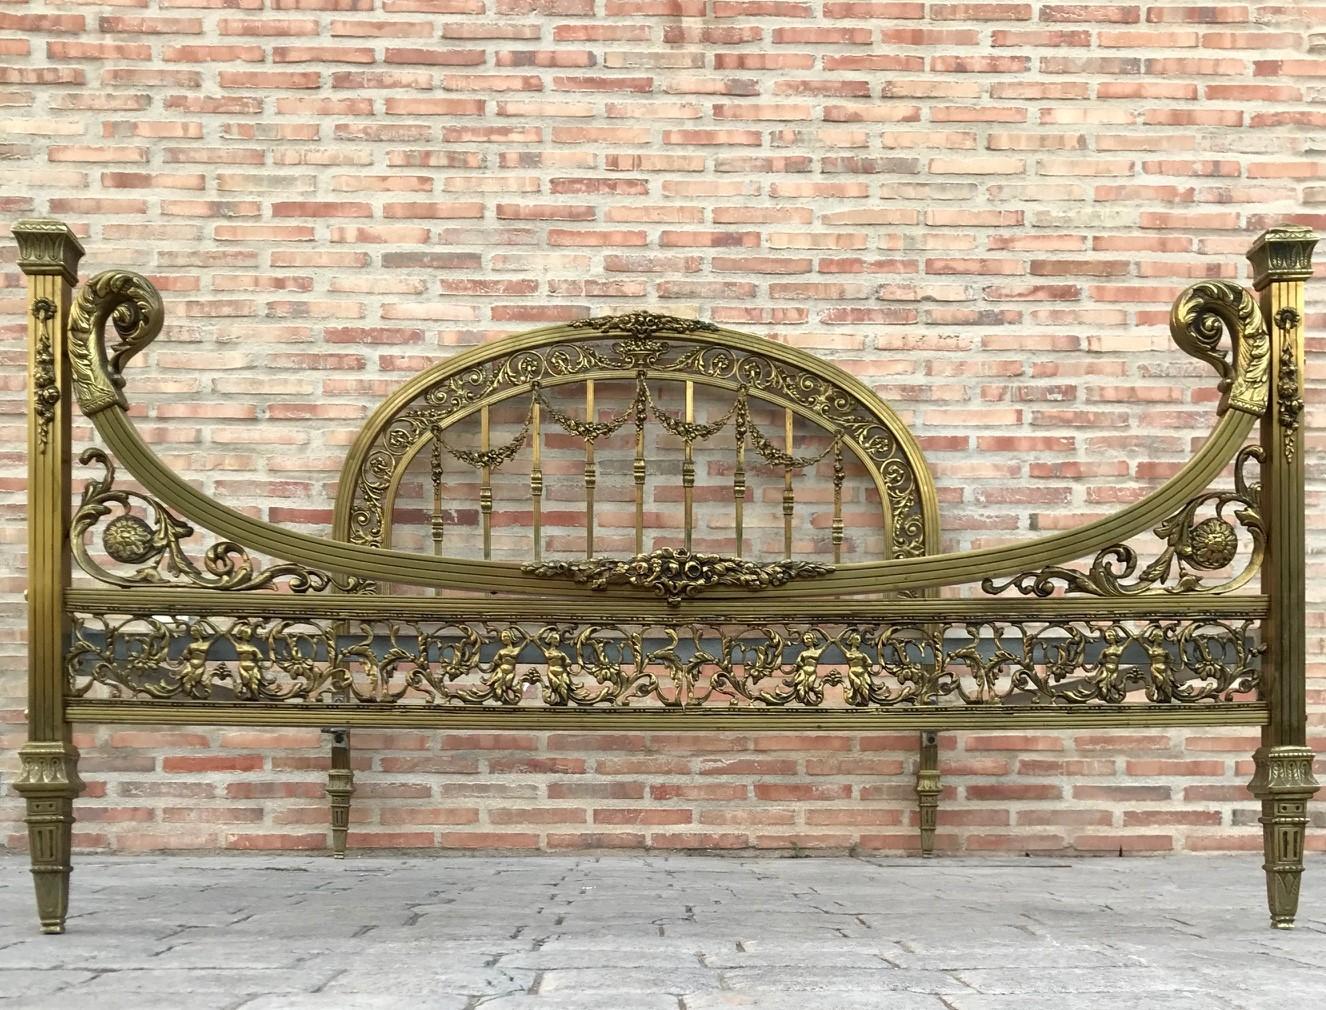 Beautiful and impressive 19th century full bedroom
French belle époque bronze, iron, brass and glass 

You can change the bed slats for adapt it a queen bed.